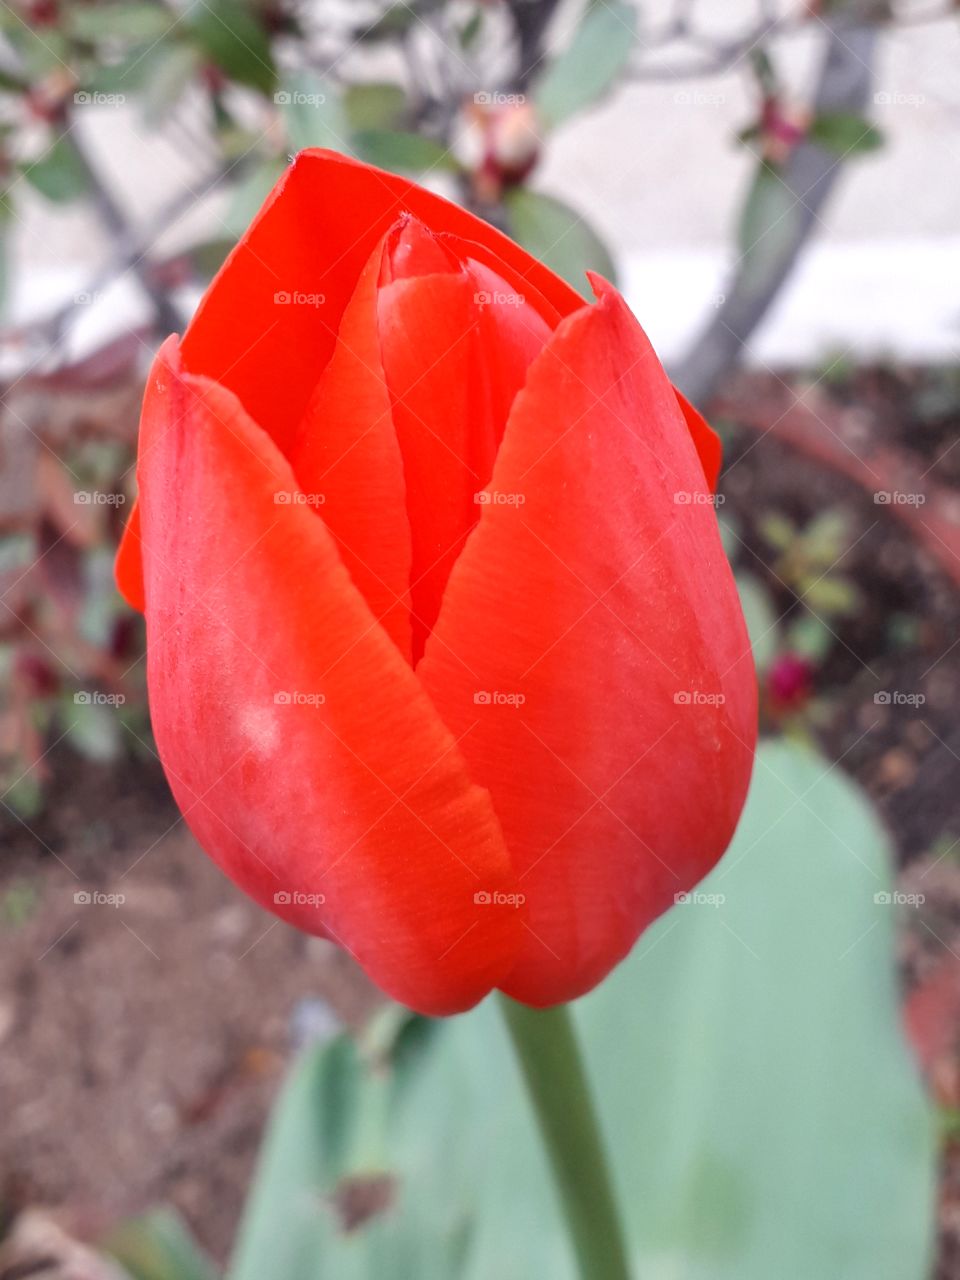 Beautiful red tulip on the ground near the office building in South Korea.